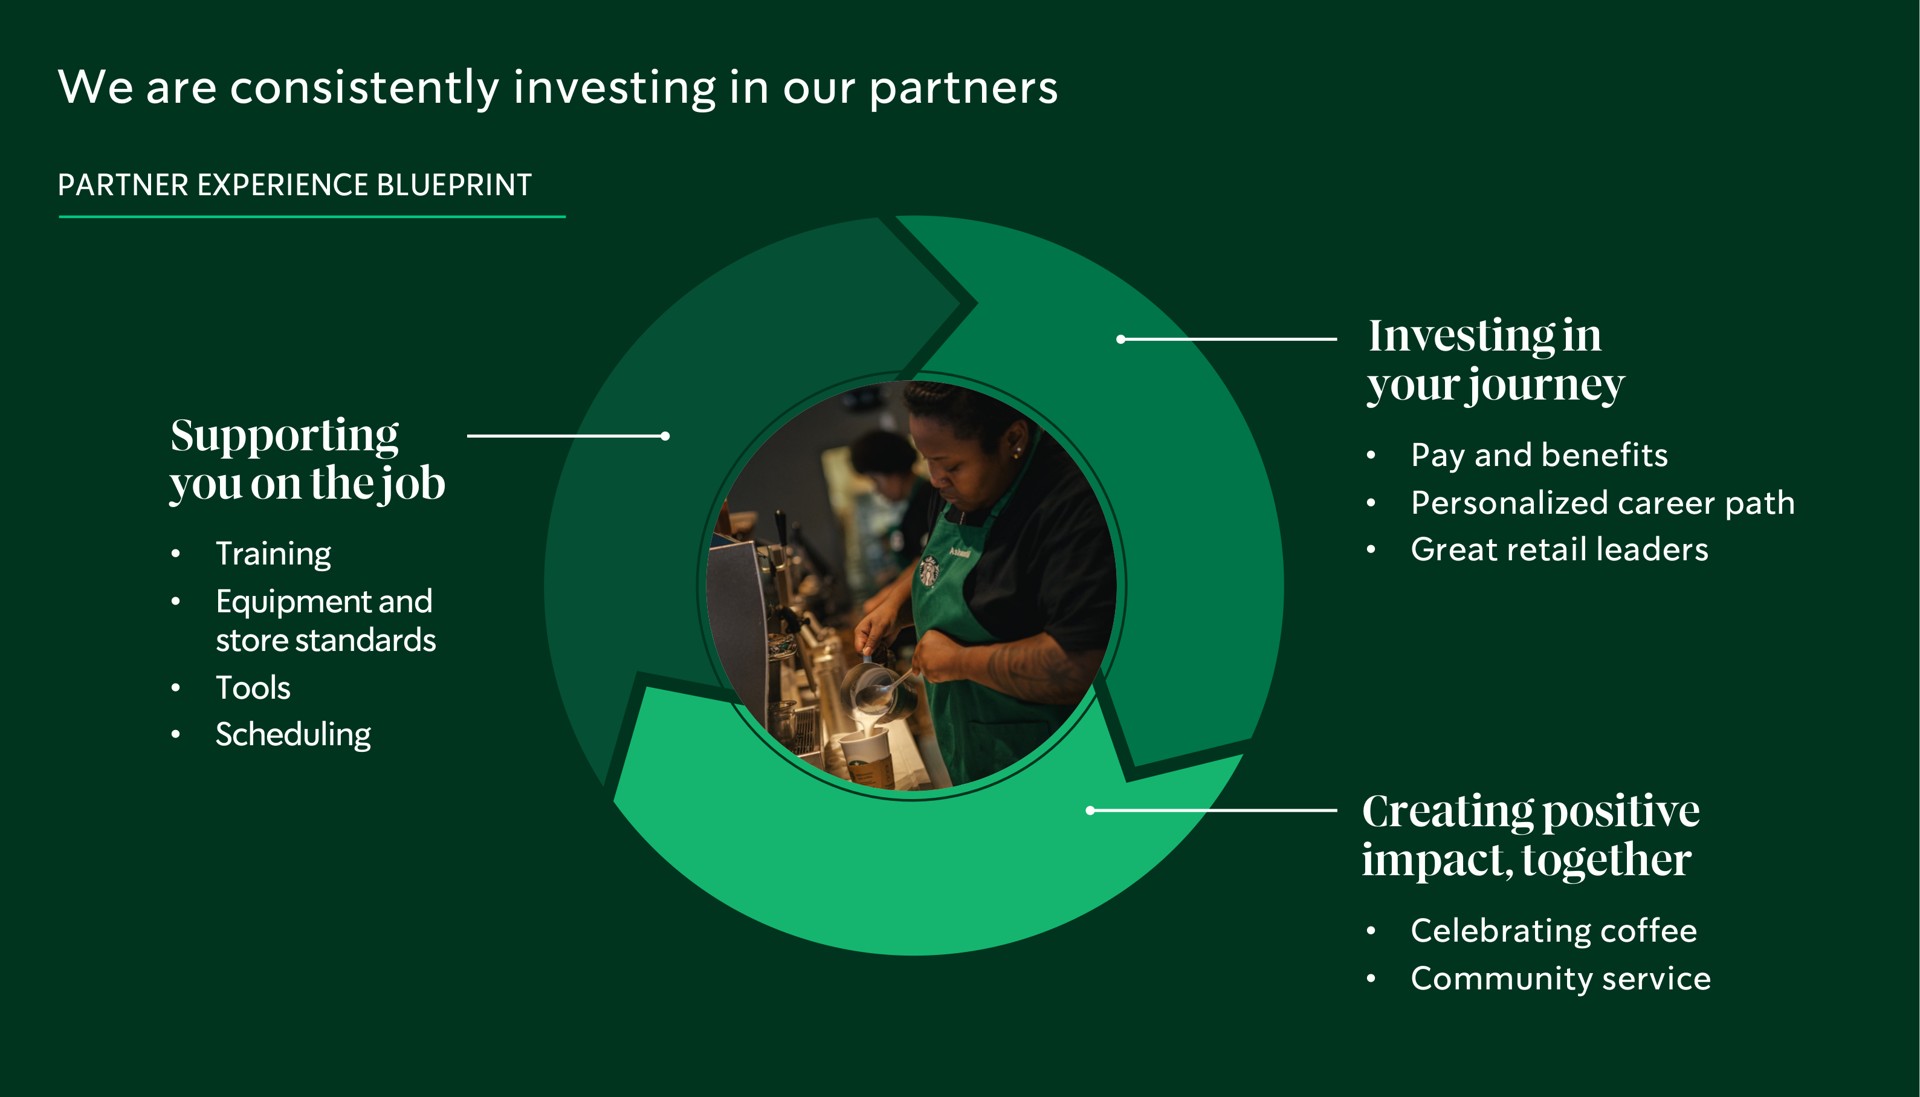 we are consistently investing in our partners impact together | Starbucks